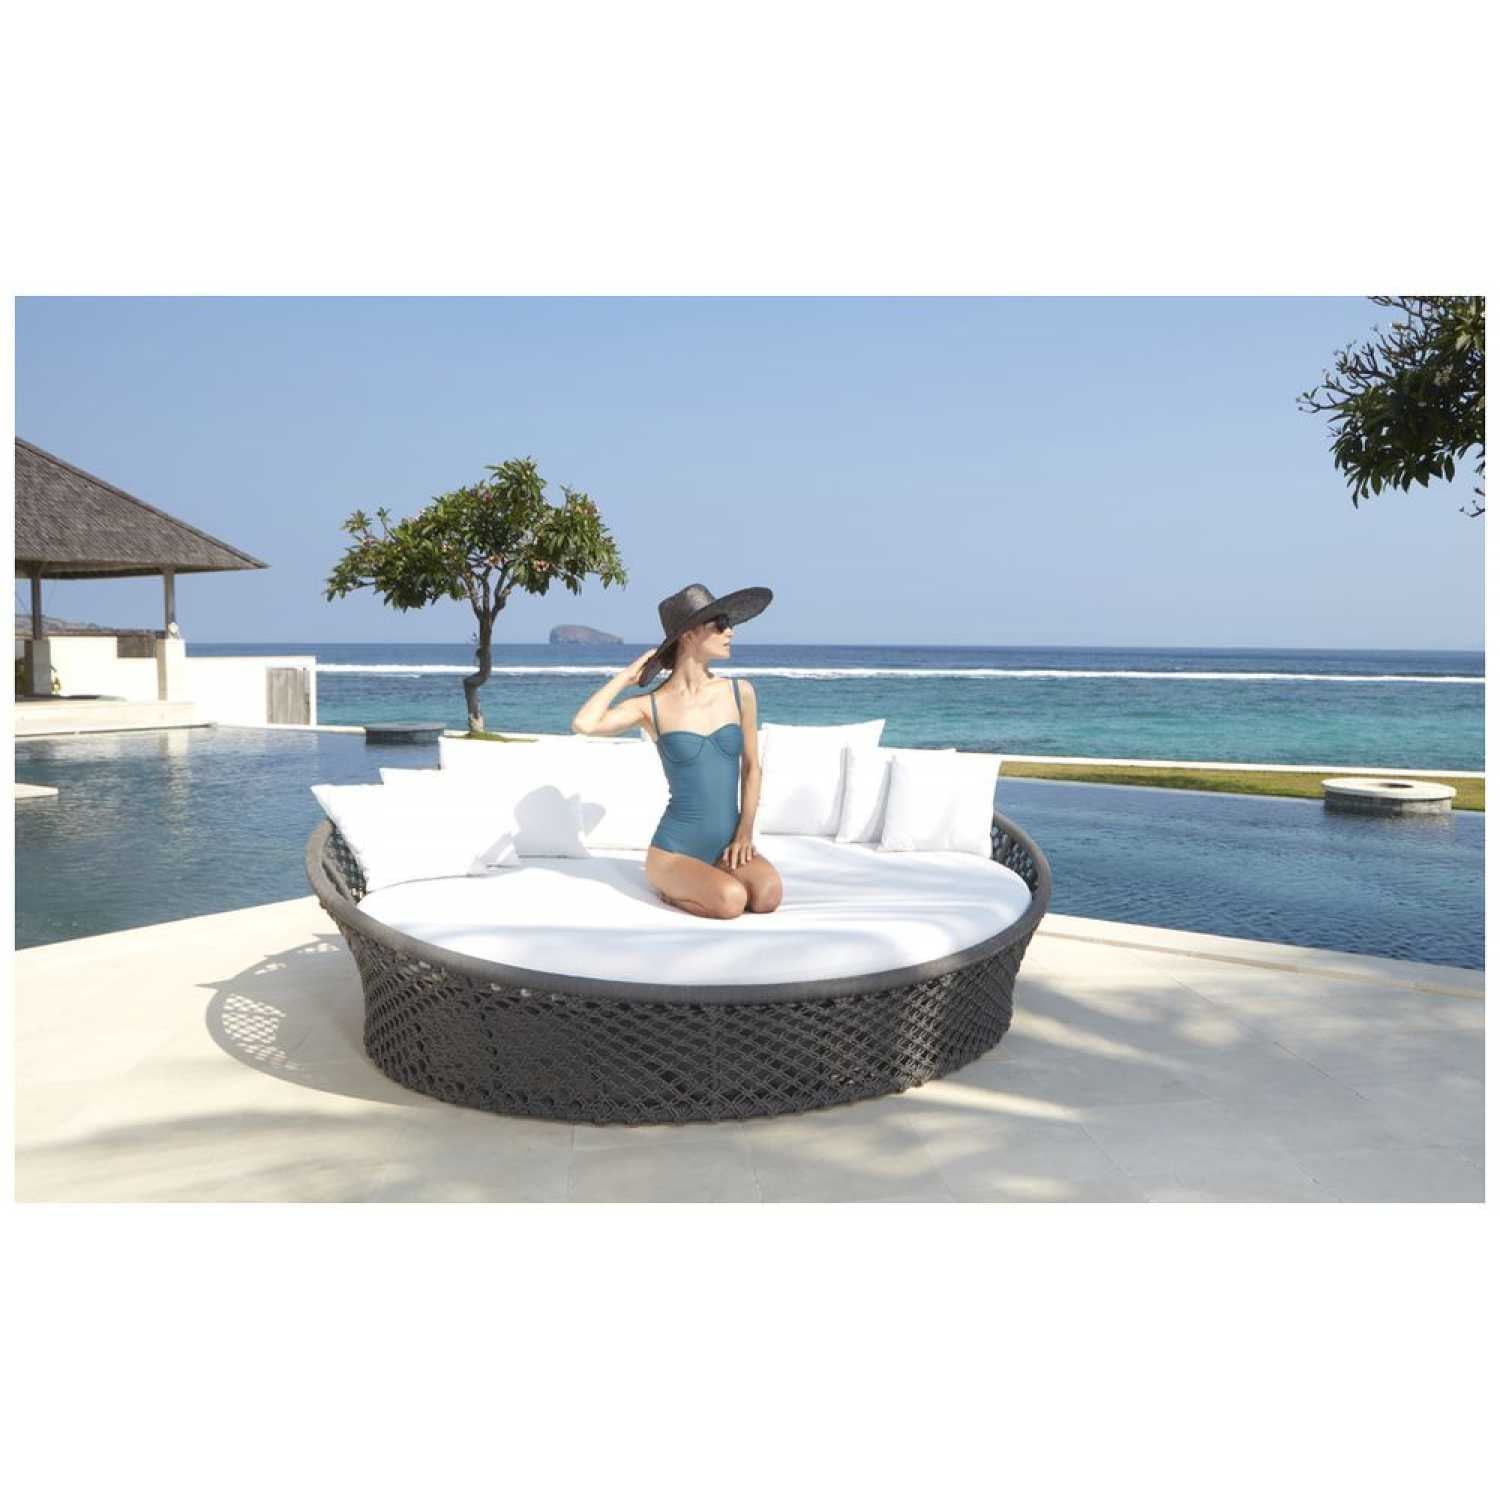 Kona Daybed - PadioLiving - Kona Daybed - Outdoor Daybed - PadioLiving